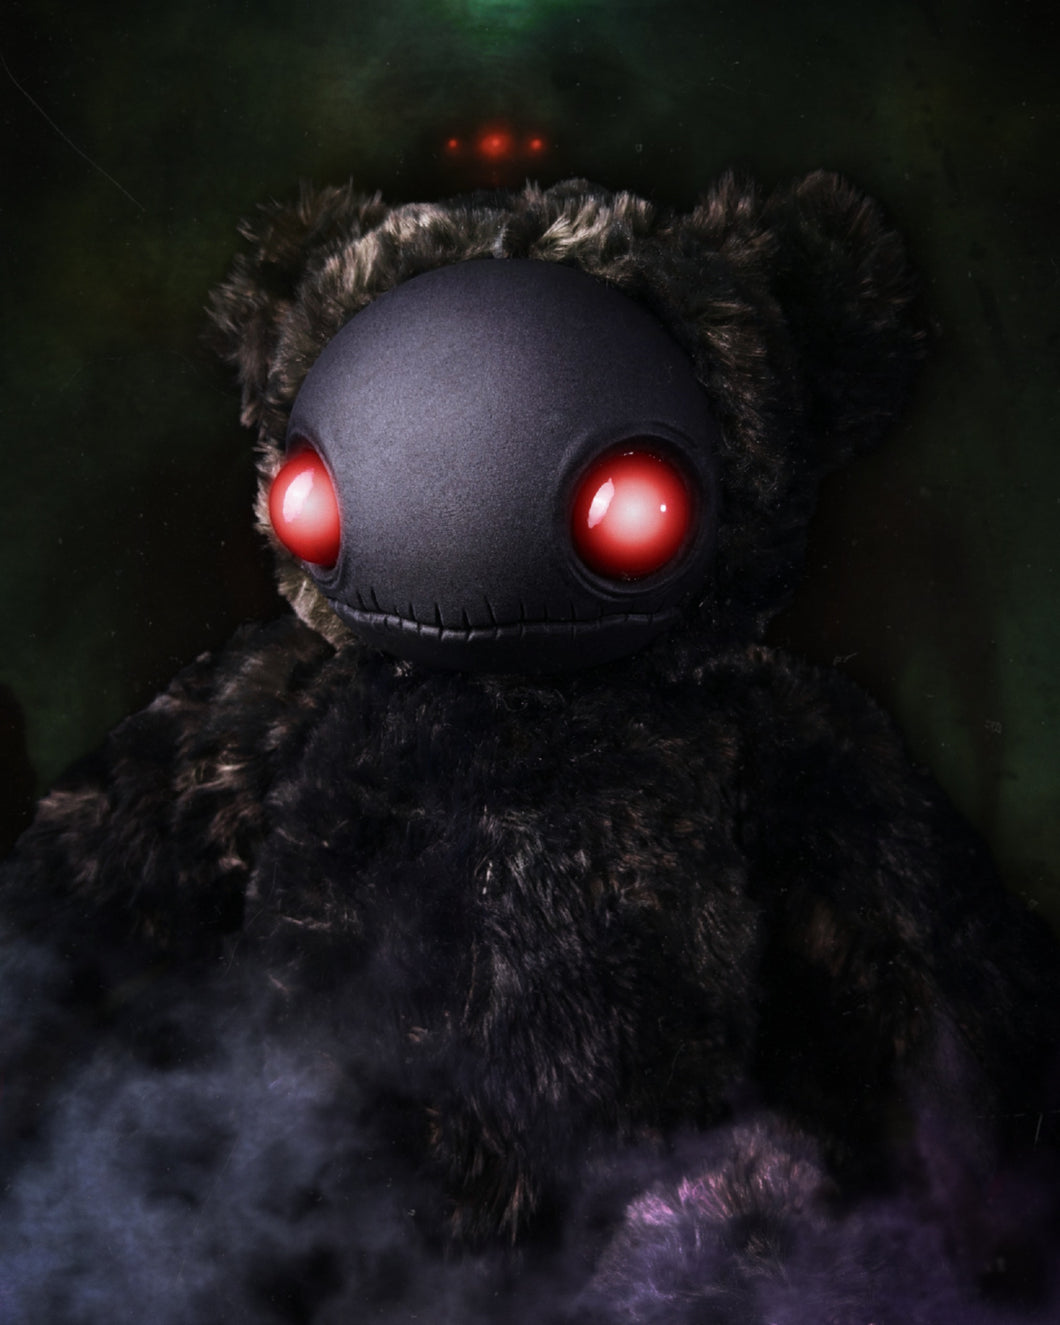 Shadowed Nightmare: LOCUST - CRYPTCRITZ  Handcrafted Dark Monster Art Doll Plush Toy for Eccentric Witches